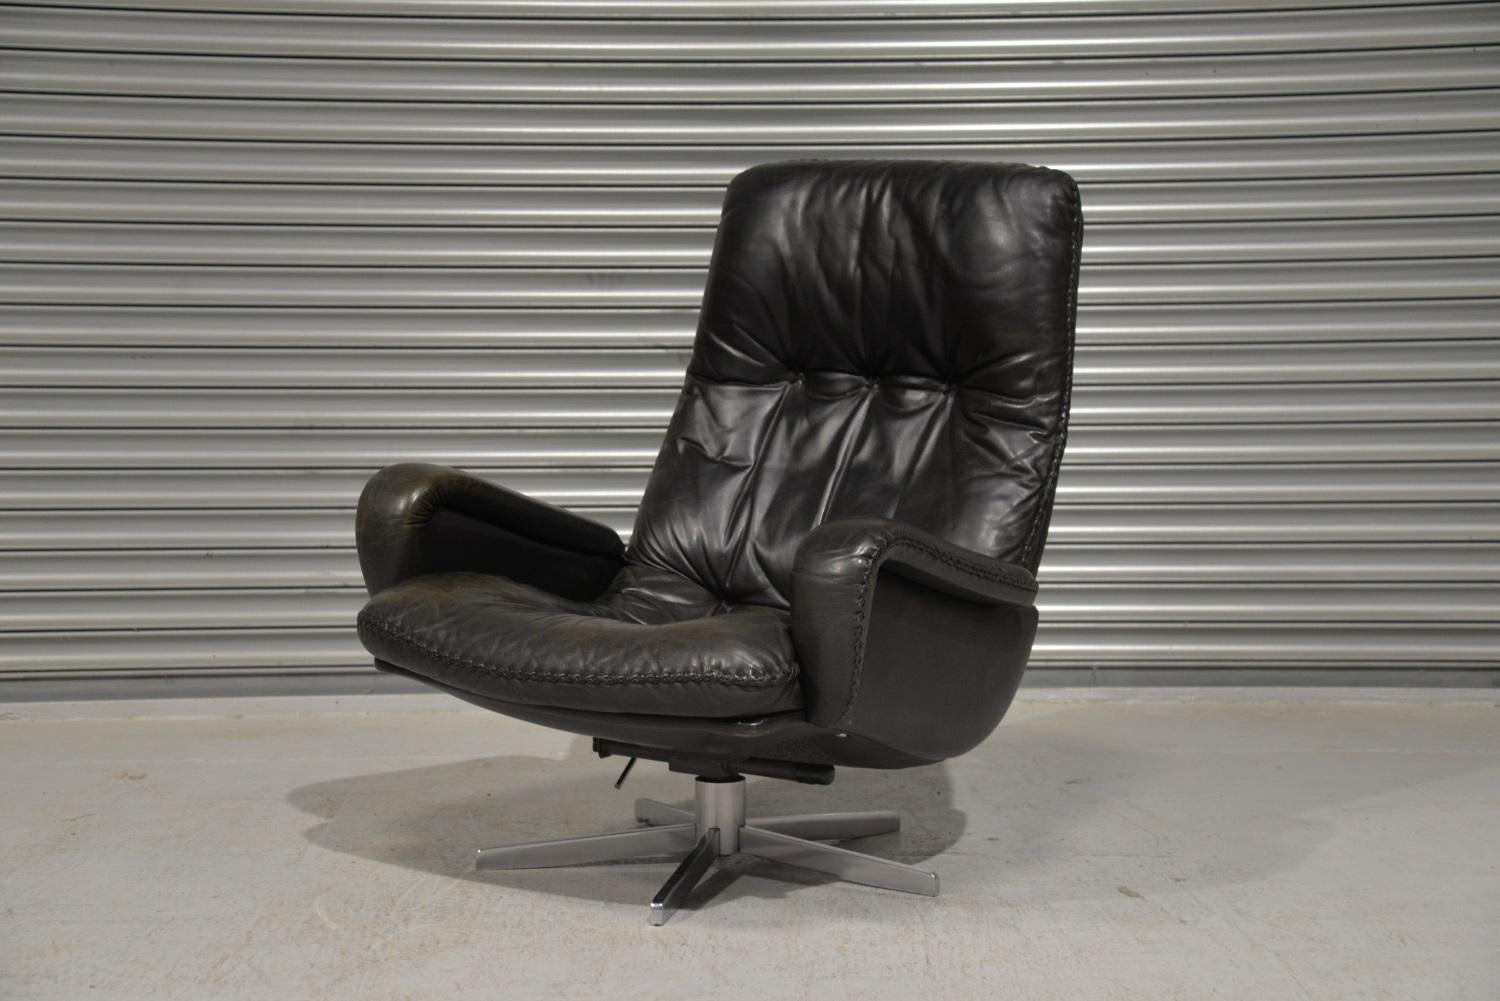 We are delighted to bring to you an ultra-rare and highly desirable vintage 1960s De Sede S 231 James Bond swivel leather armchair.  This same swivel leather armchair and ottoman were used as a prop in the 1969 James Bond film, On Her Majesty's